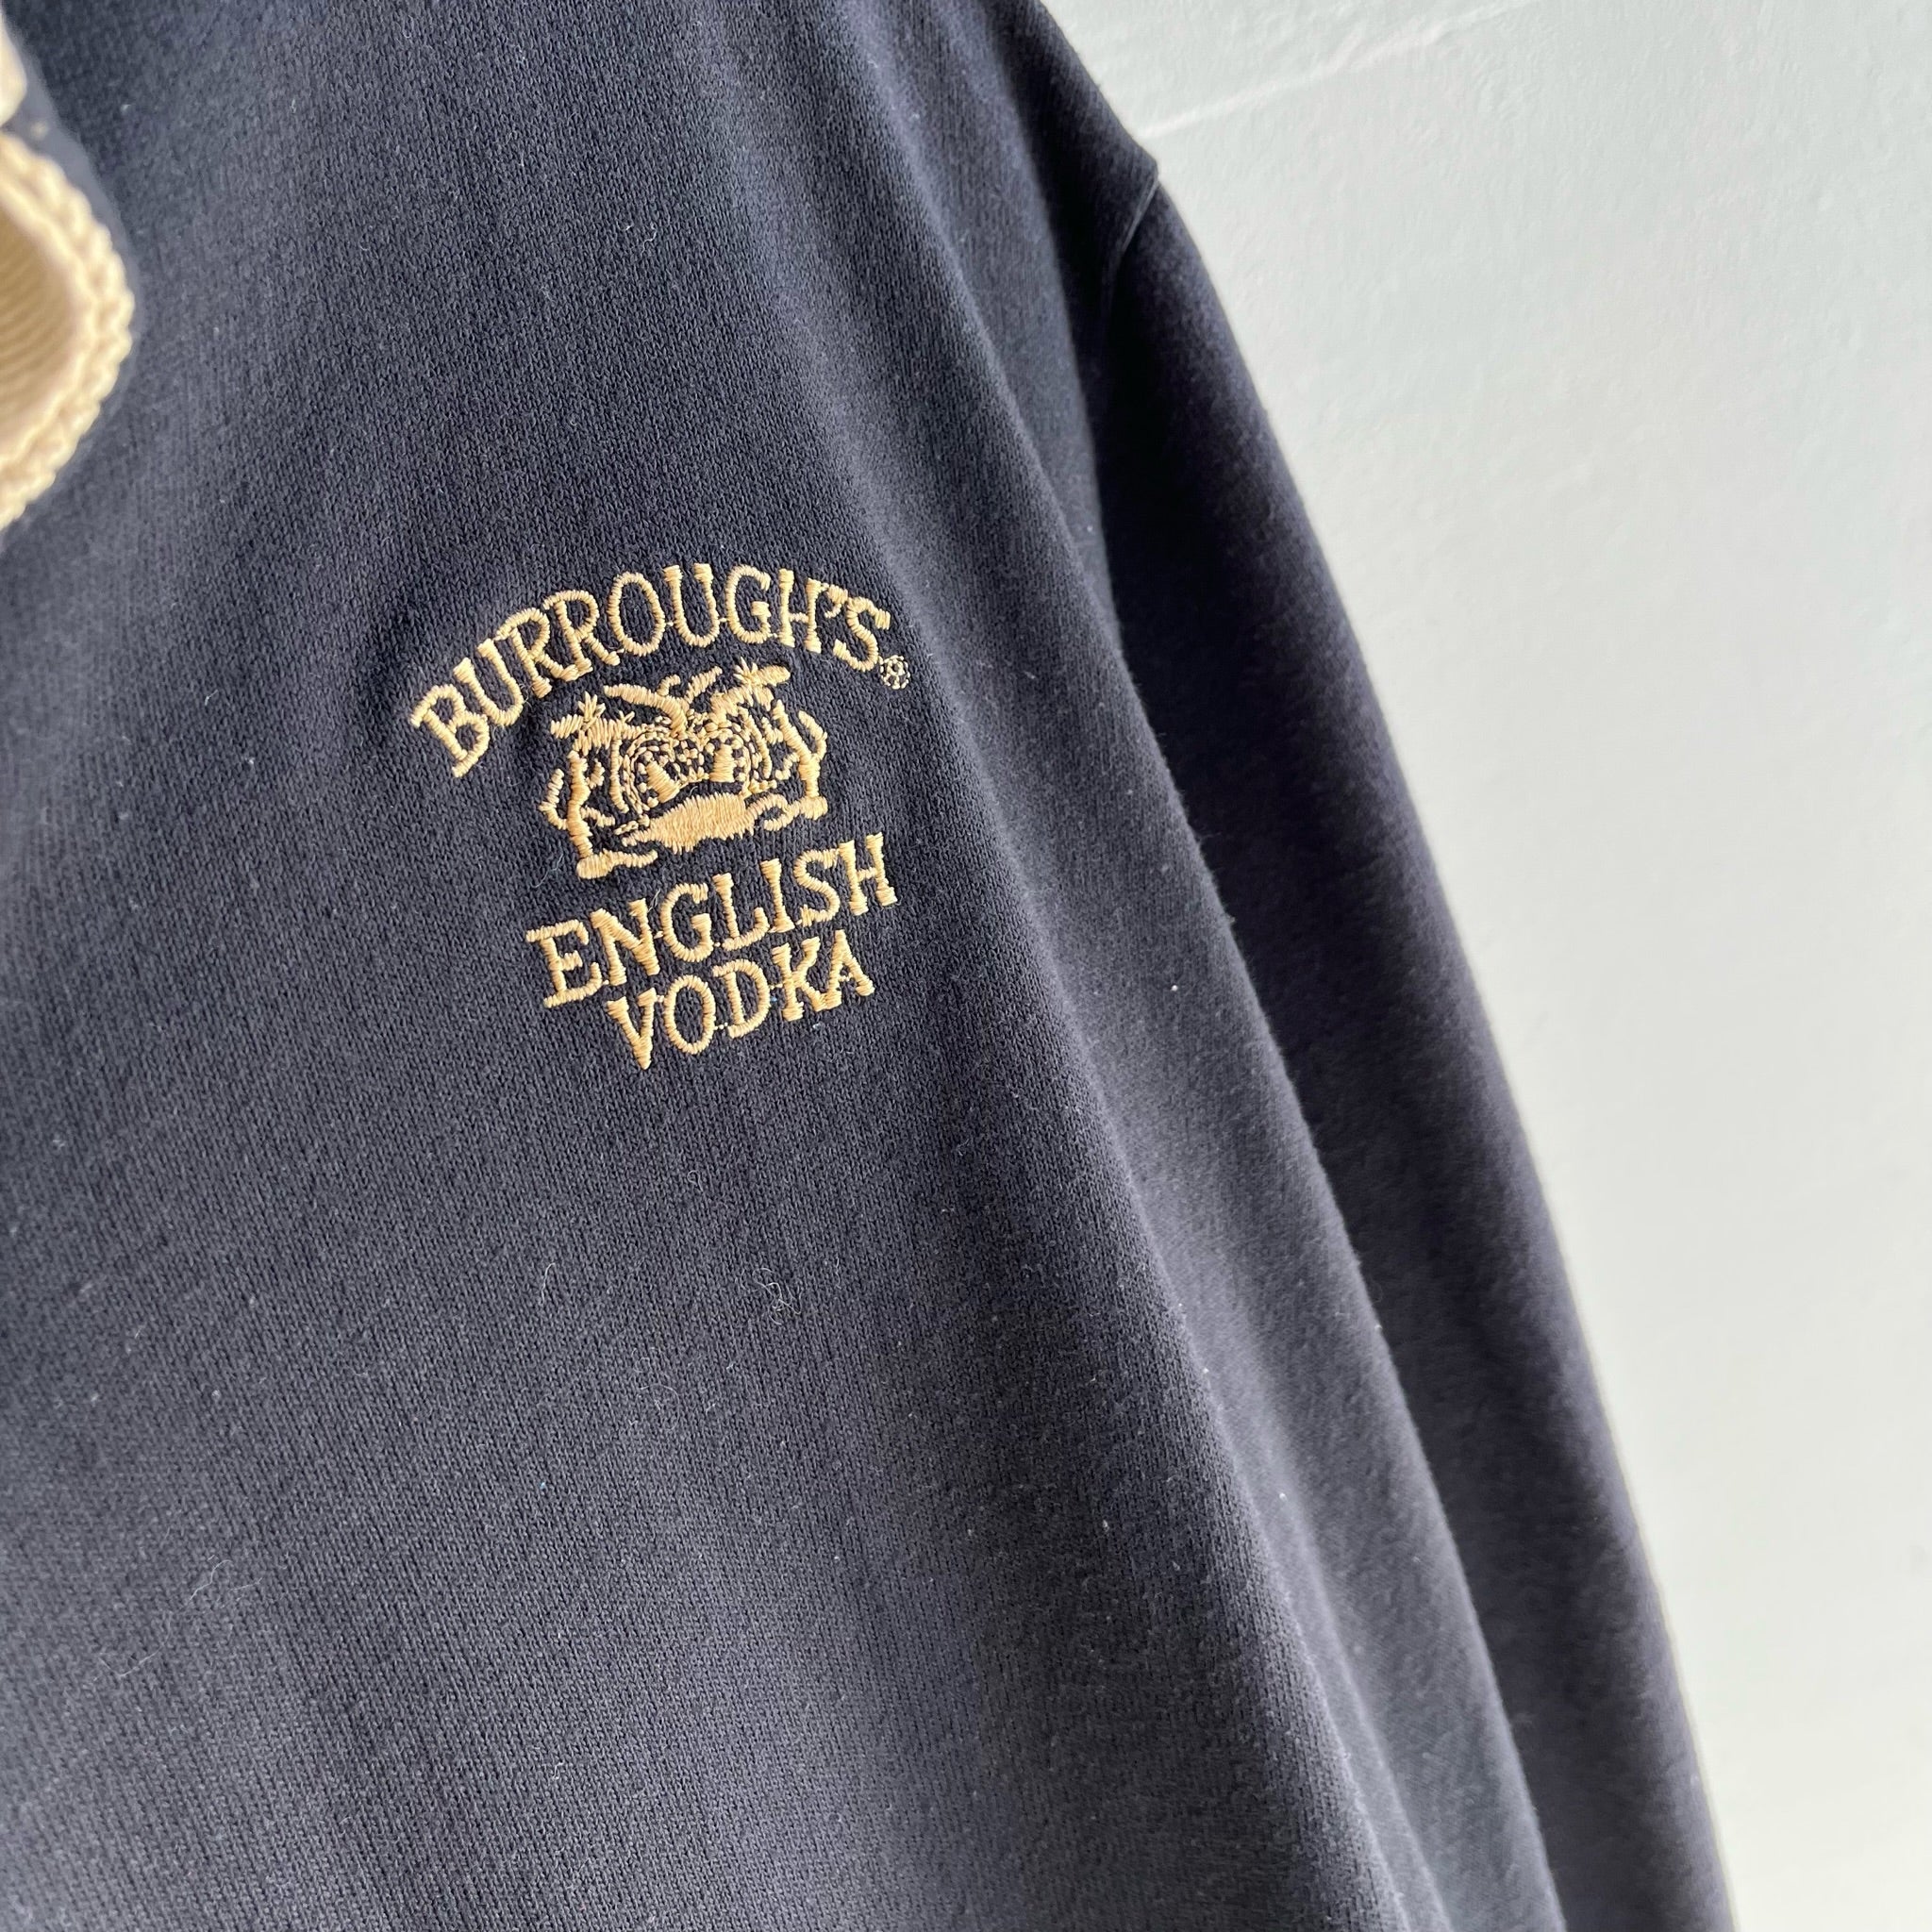 1980s Burrough's English Vodka Lightweight Rugby Shirt (with a pouch!)